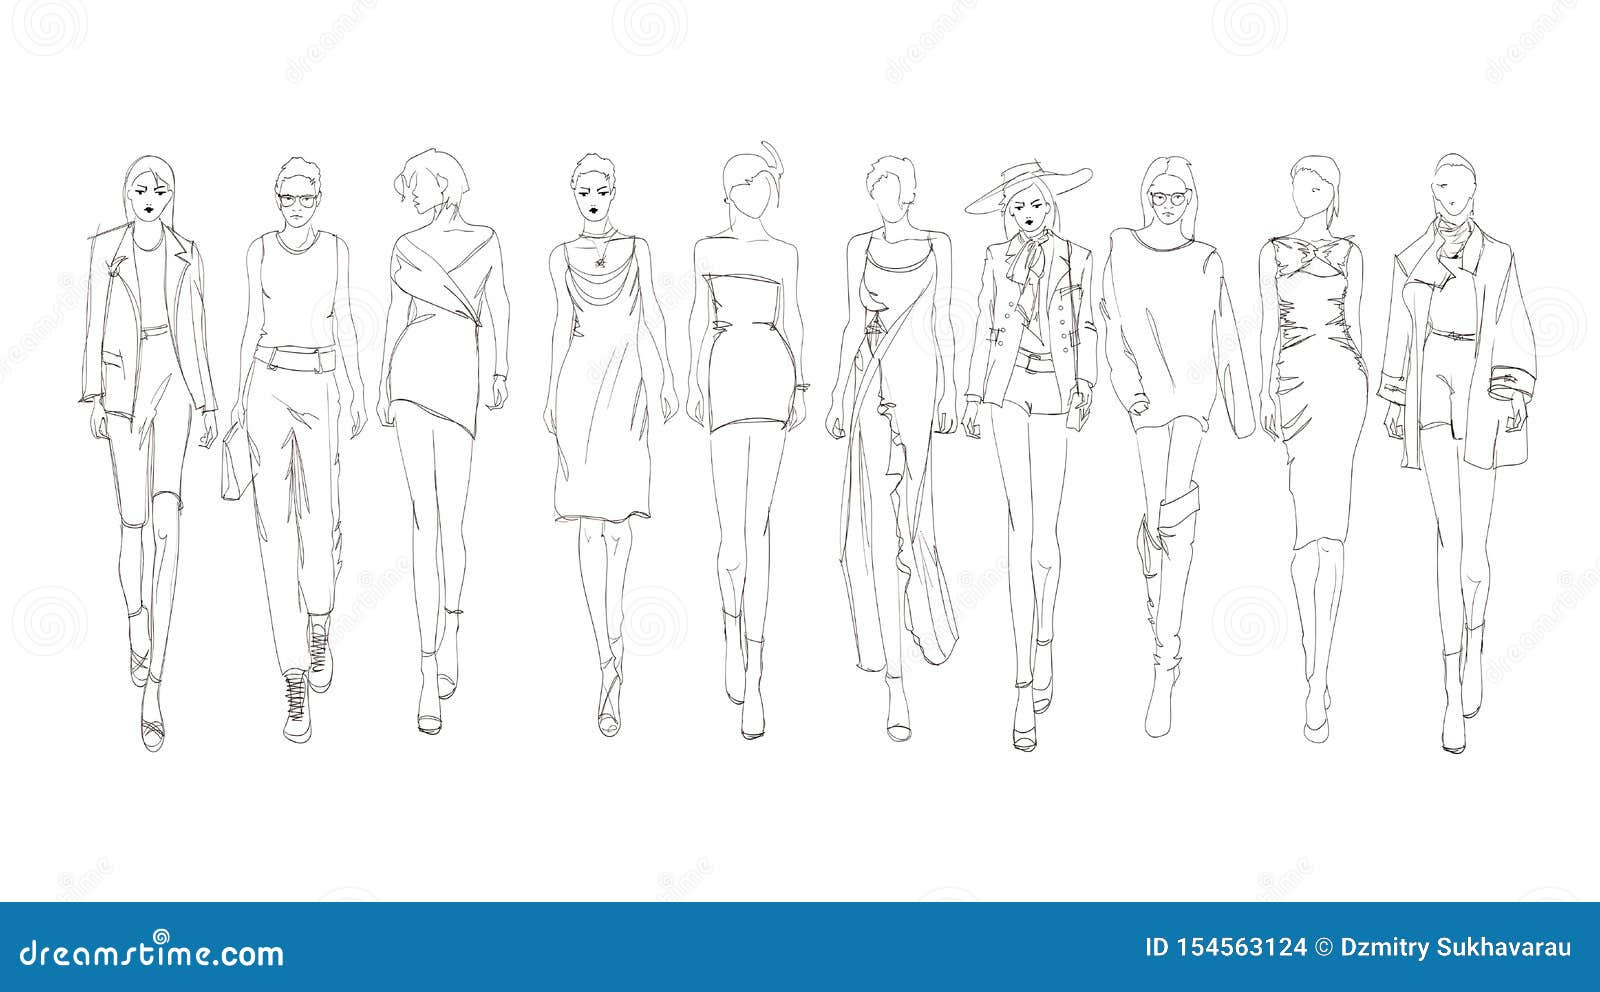 Female poses chart by AonikaArt on DeviantArt